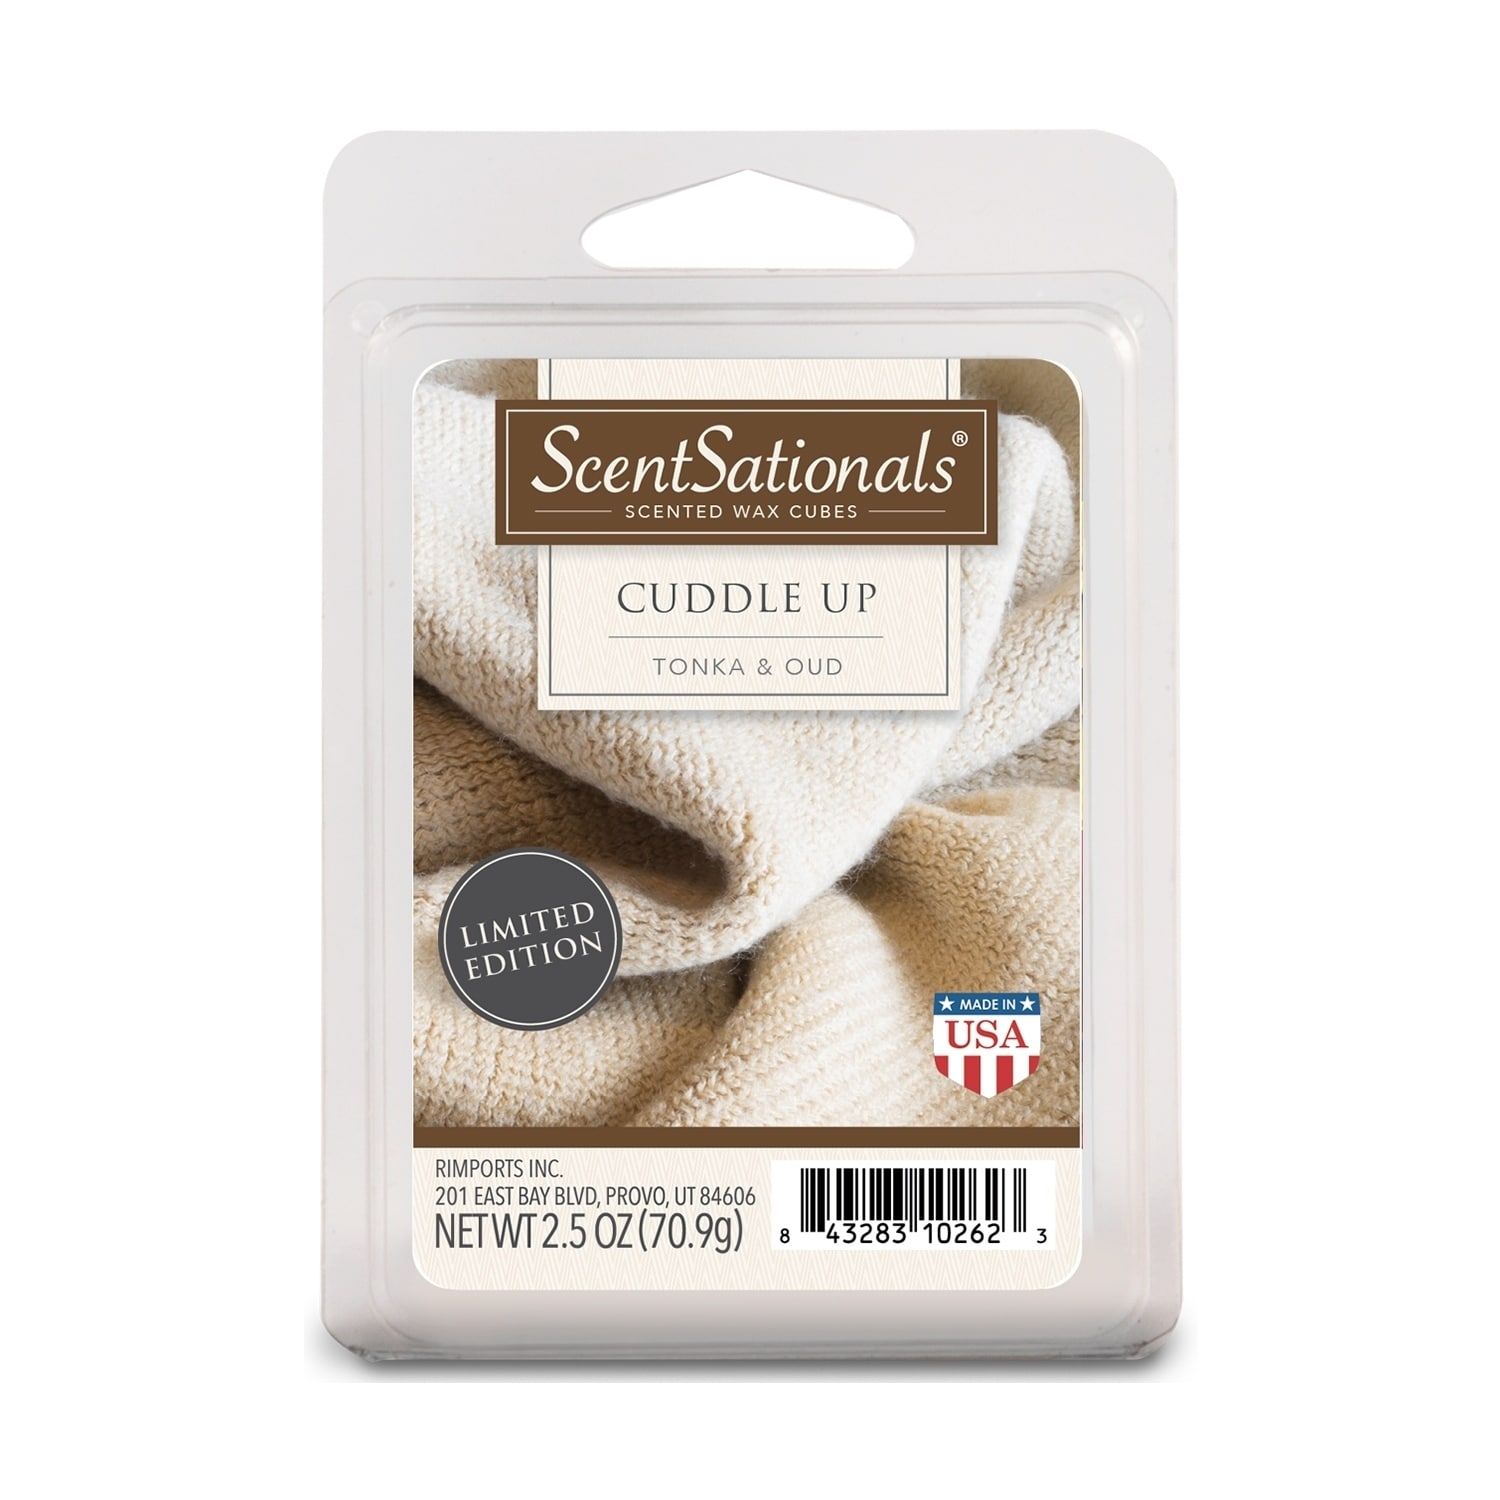 Scentsationals Cuddle Up 2.5oz Fragrant Wax Melts - 6 Scented Wax Cubes -  On Sale - Bed Bath & Beyond - 30820226